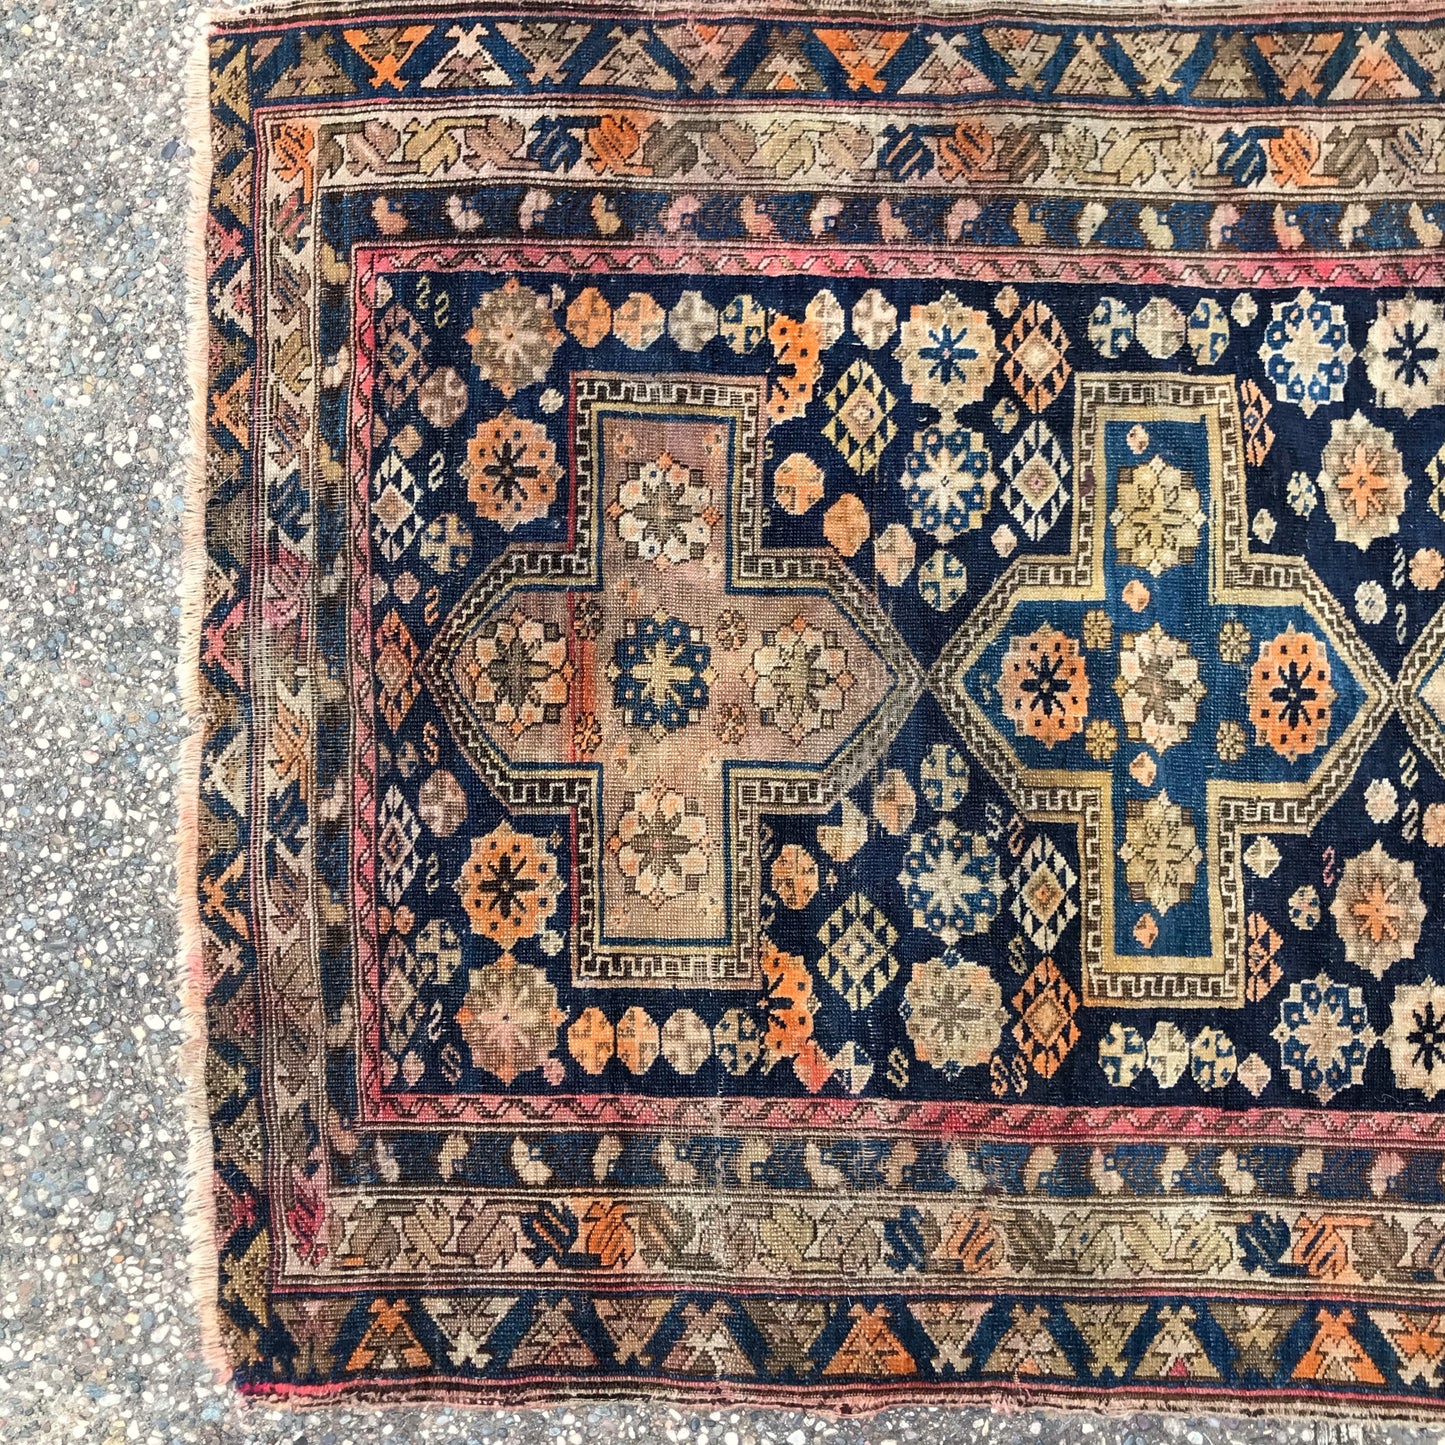 “REMINGTON” Antique Hand-knotted Rug (4.9 x 3.9)